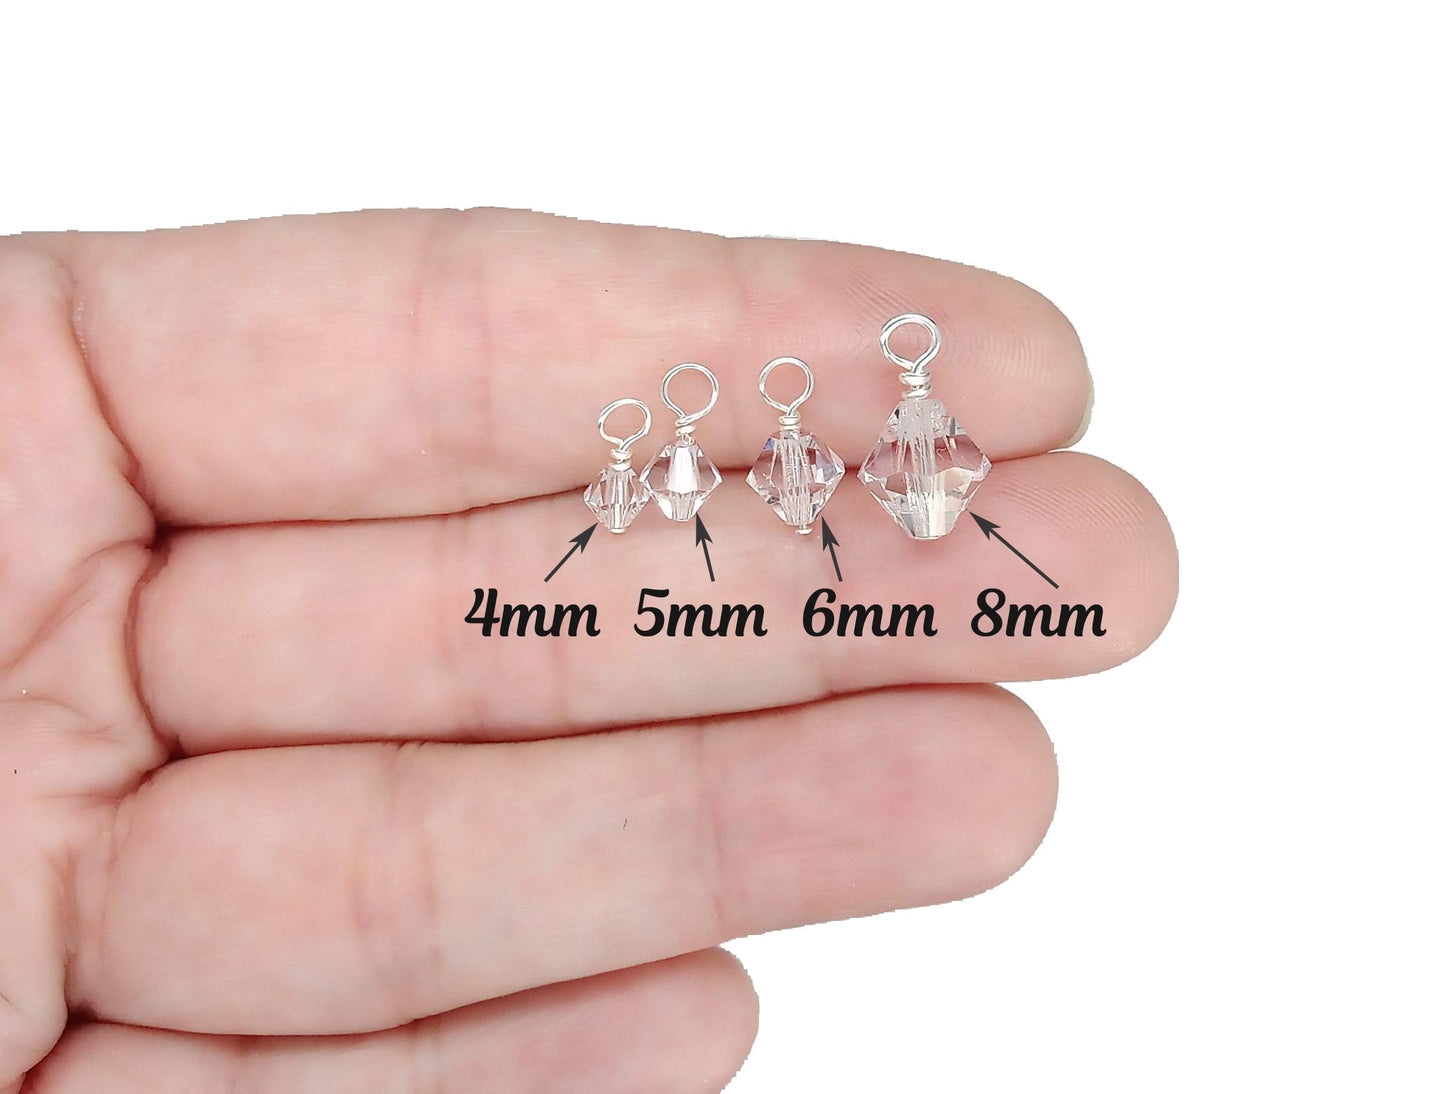 Crystal Bicone Charms, 4mm 5mm 6mm 8mm Czech Crystal Bead Dangles - Adorabilities Charms & Trinkets